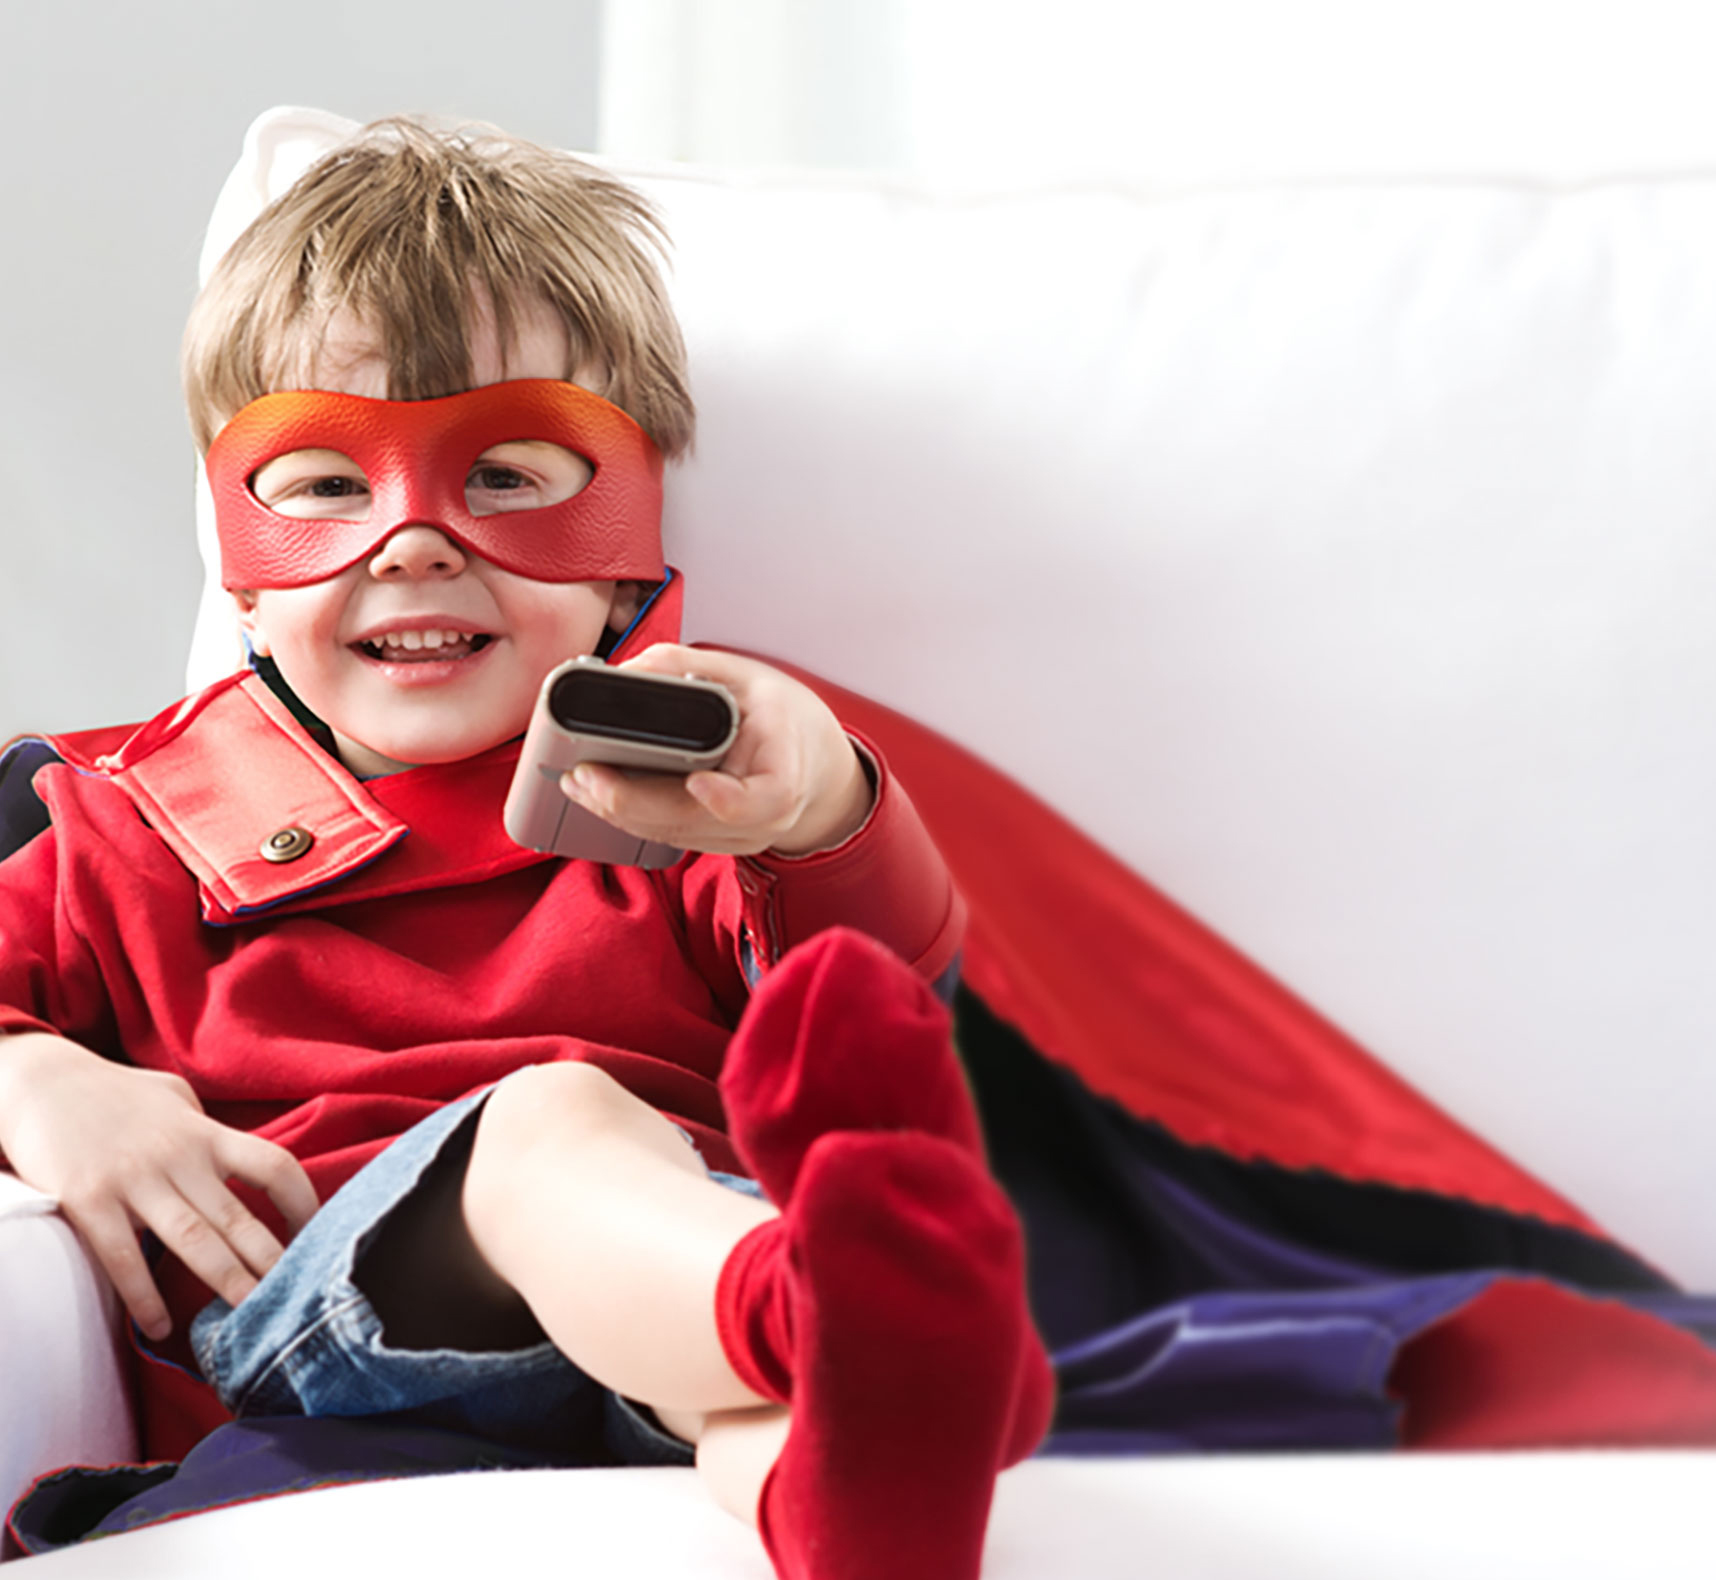 Kid in costume on couch with remote